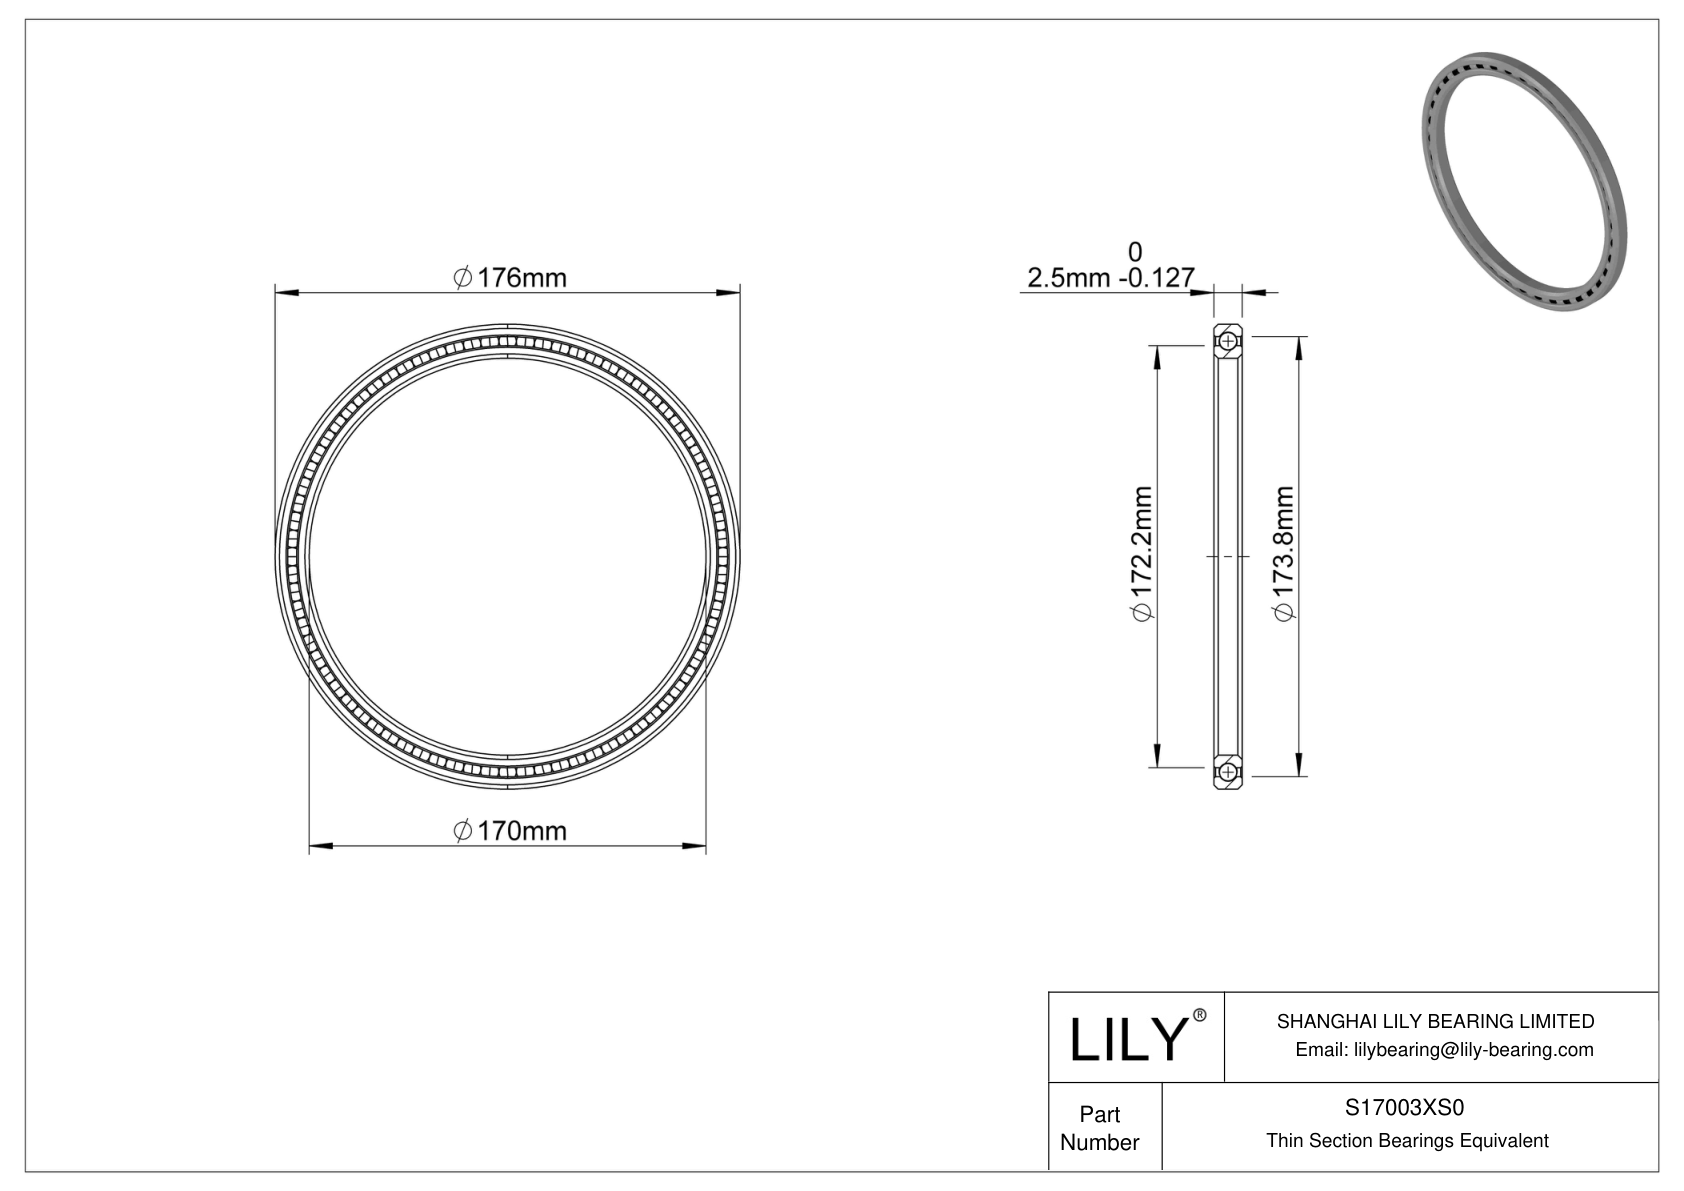 S17003XS0 Constant Section (CS) Bearings cad drawing